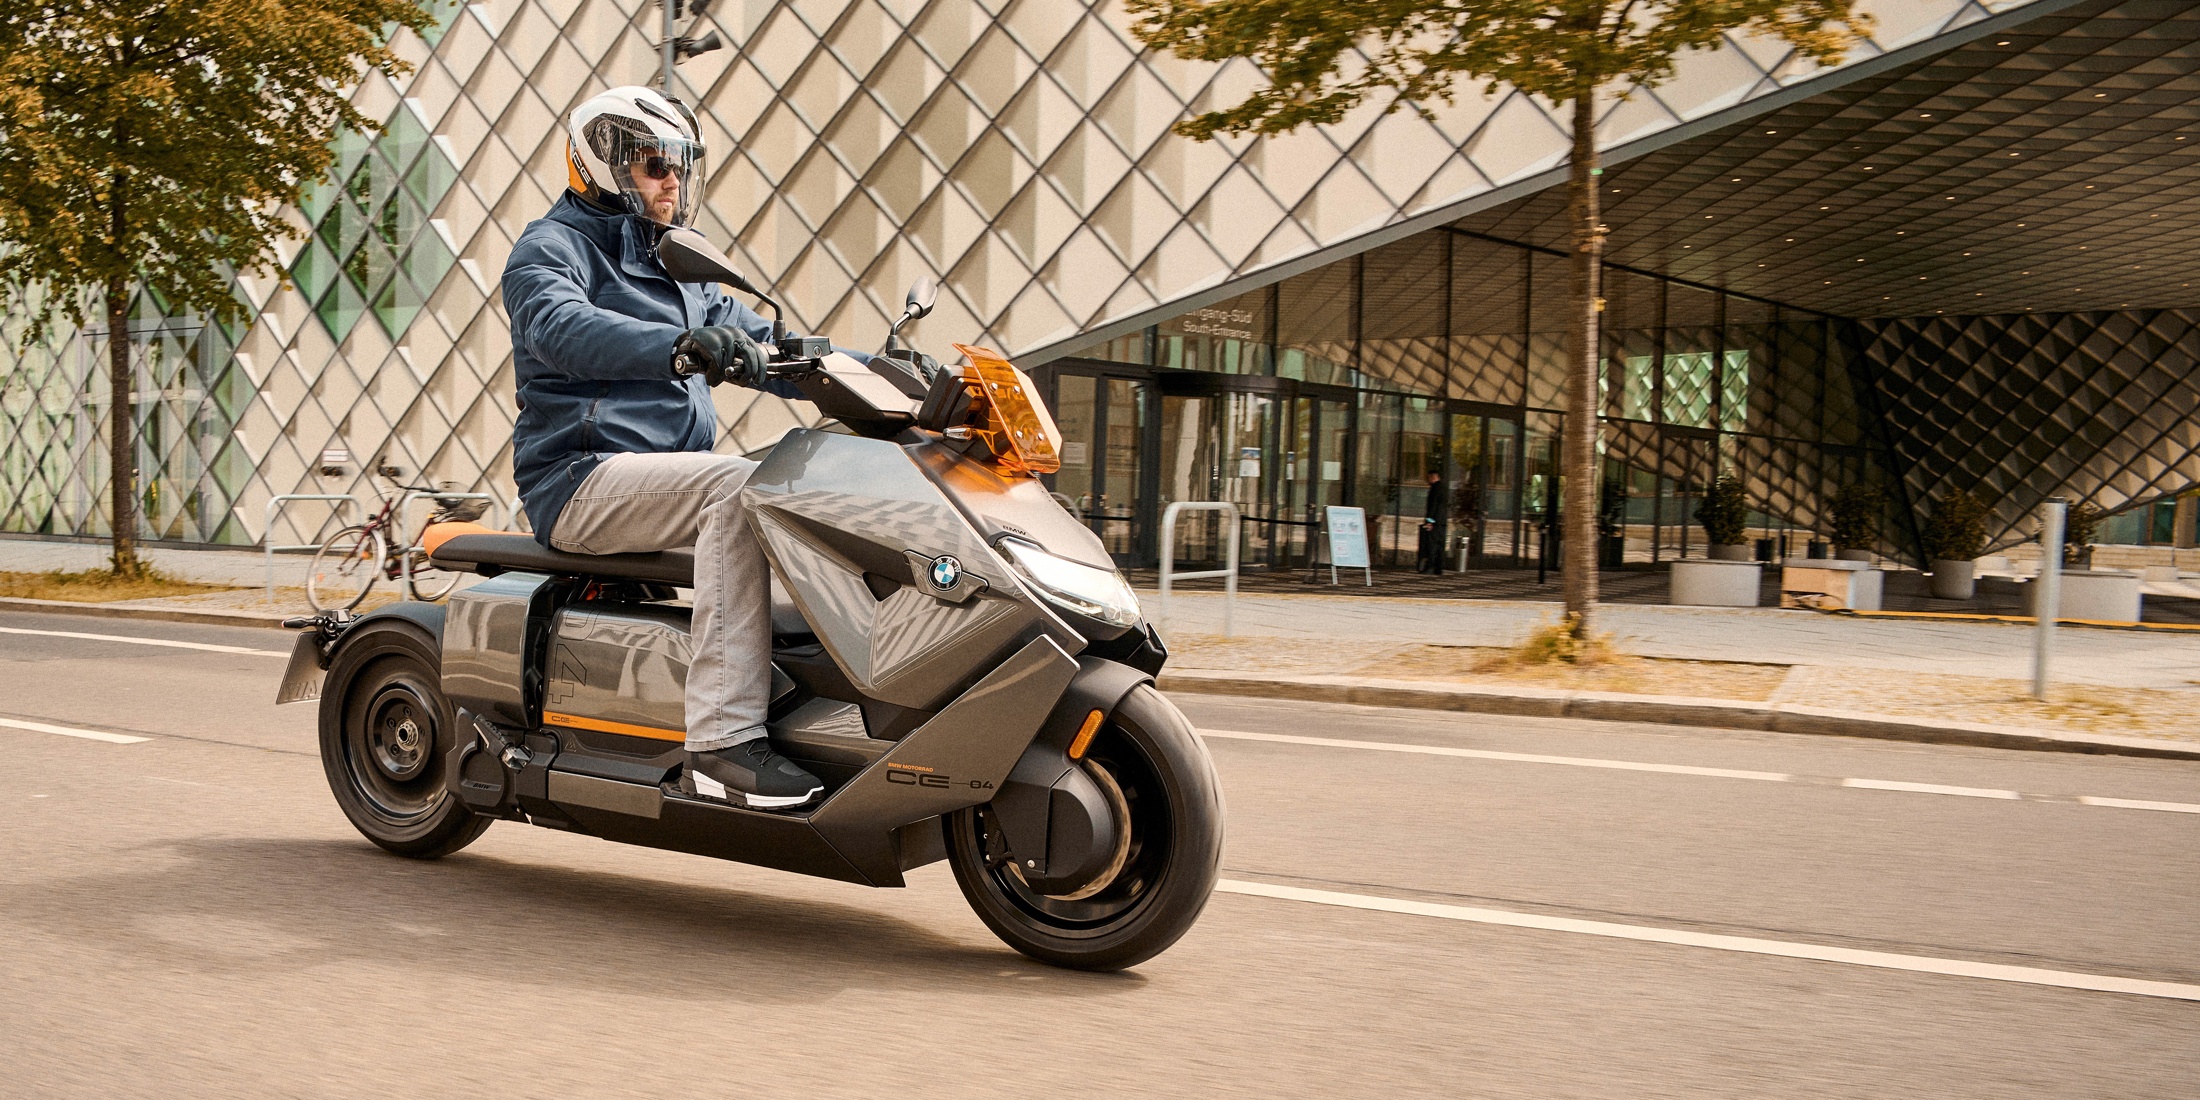 BMW begins full production of its futuristic 75 mph scooters